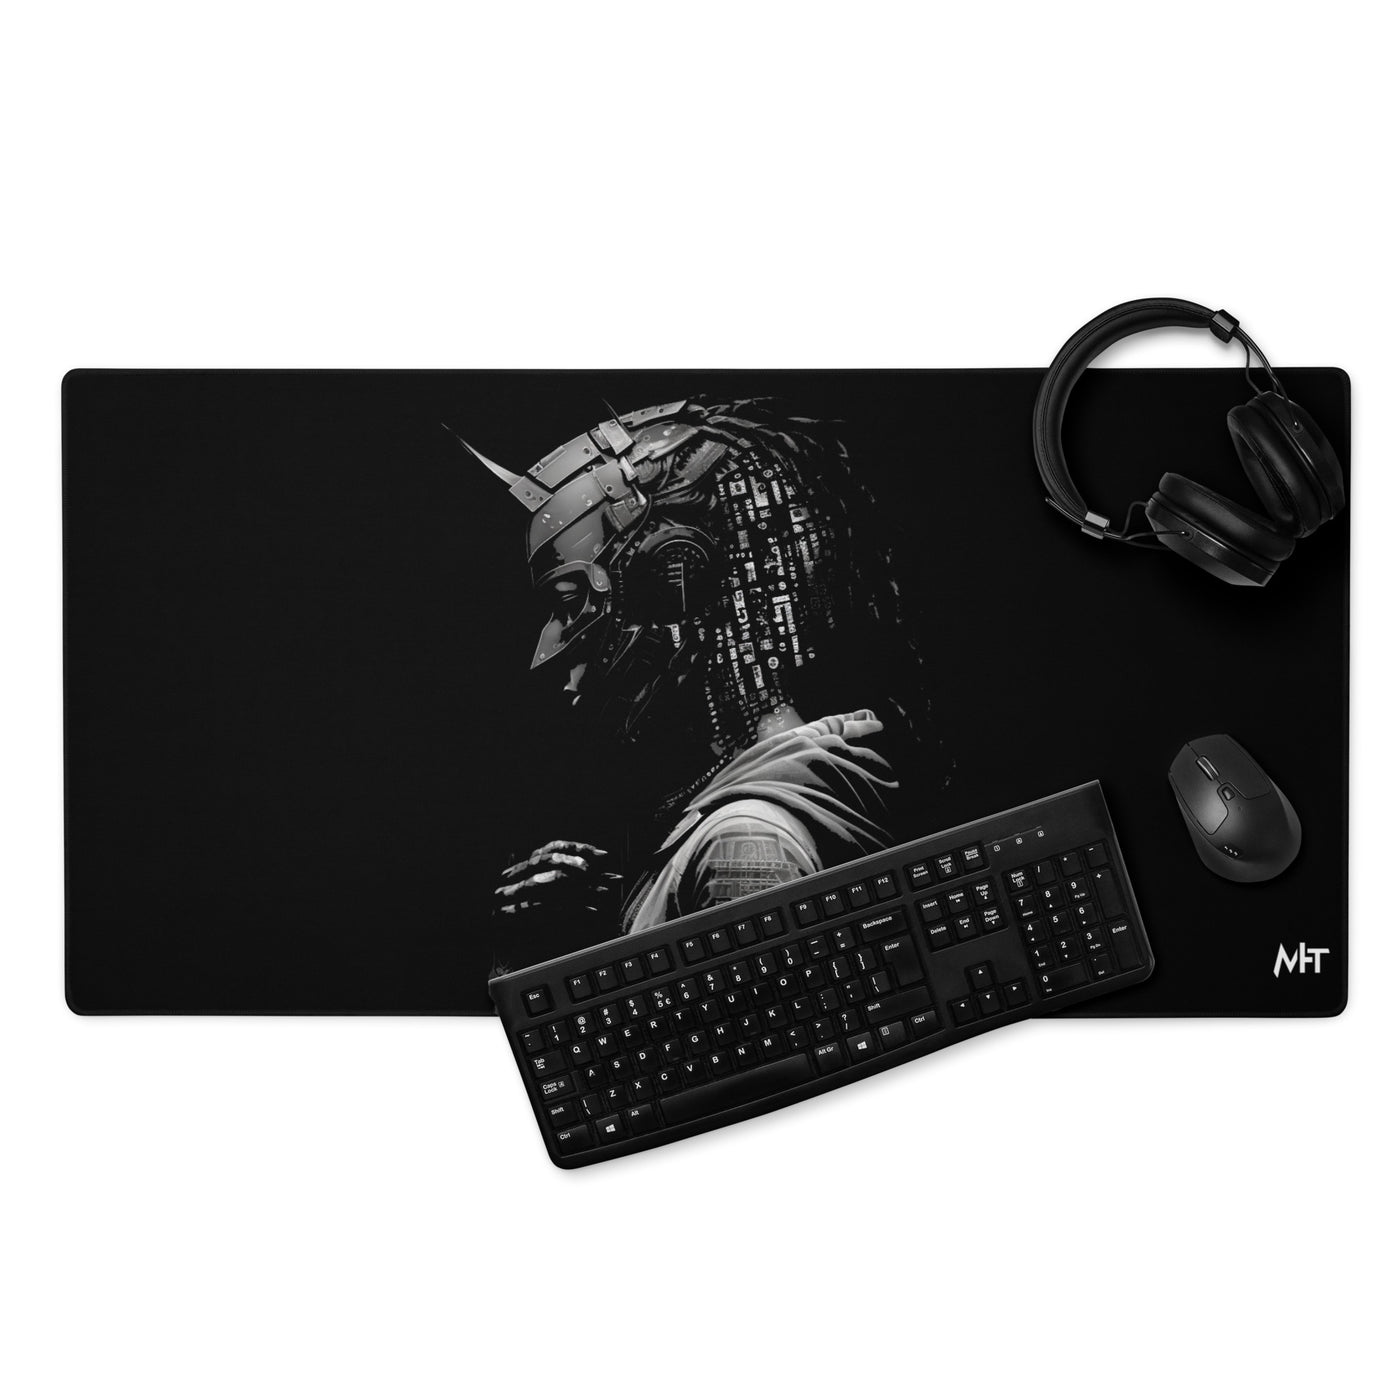 Cyberware assassin v35 - Gaming mouse pad